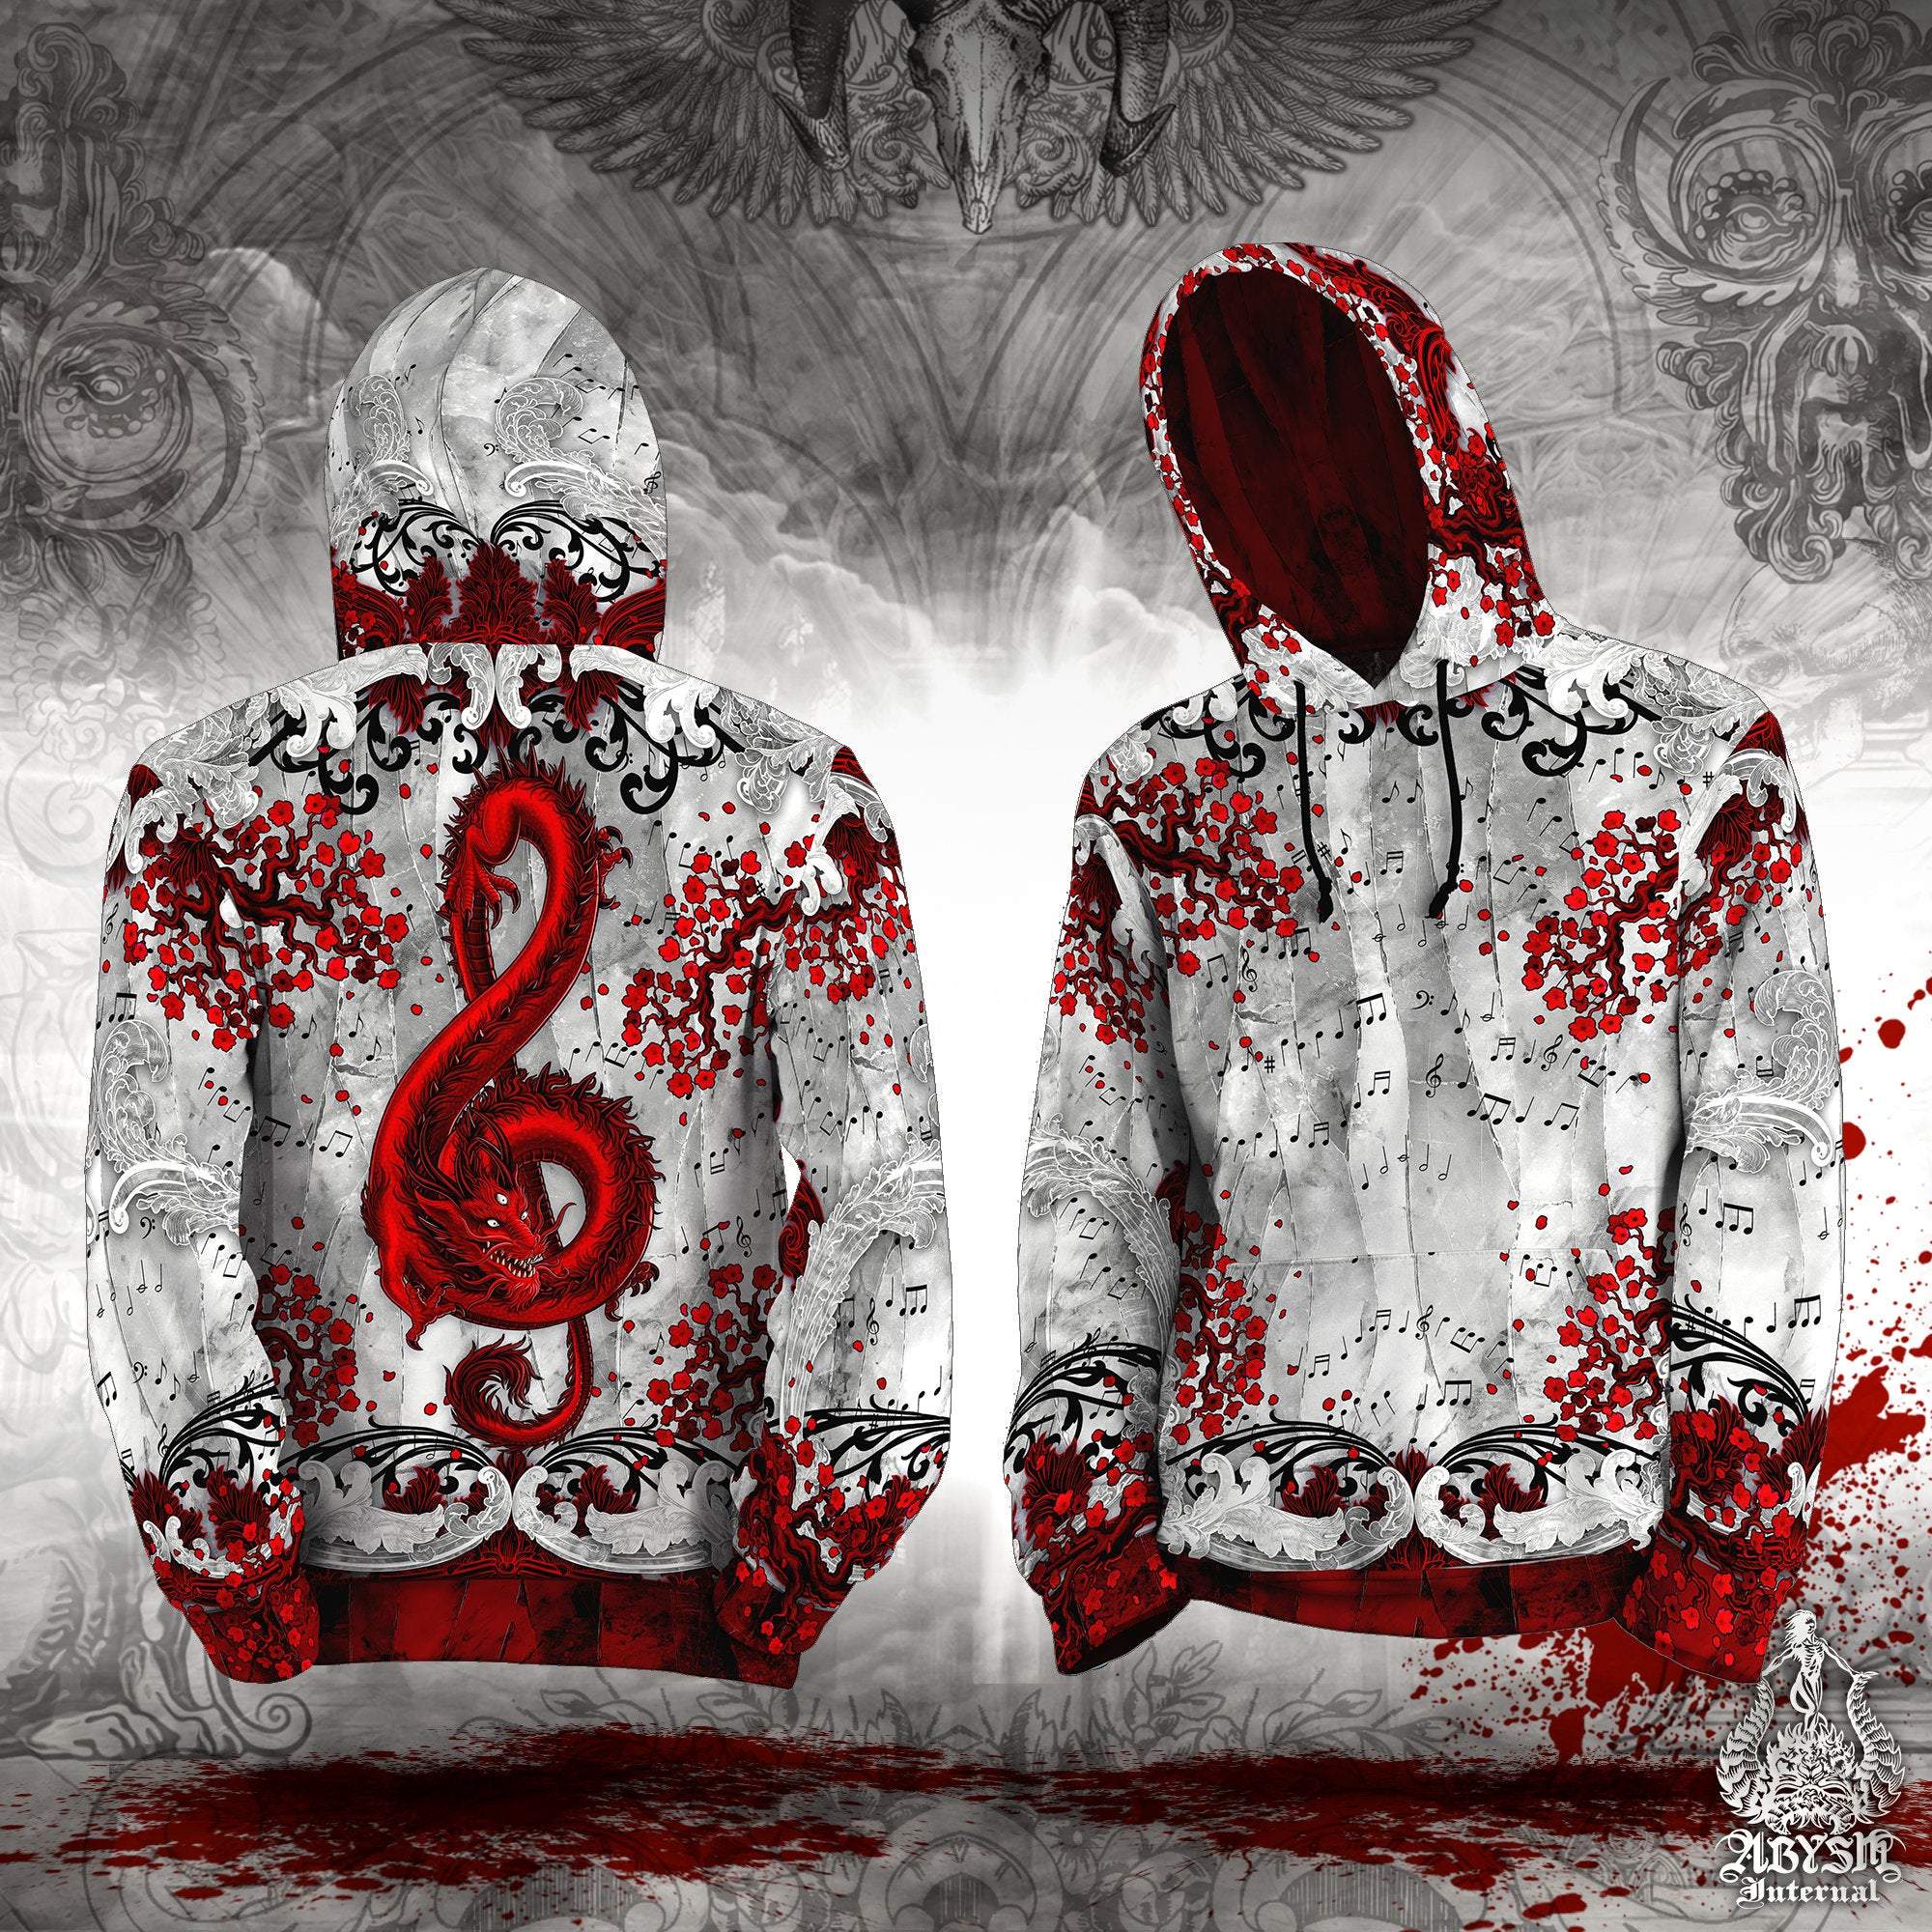 Red Dragon Hoodie, Hip Hop Outfit, Goth Music Festival Clothes, Alternative Clothing, Unisex - Bloody White - Abysm Internal